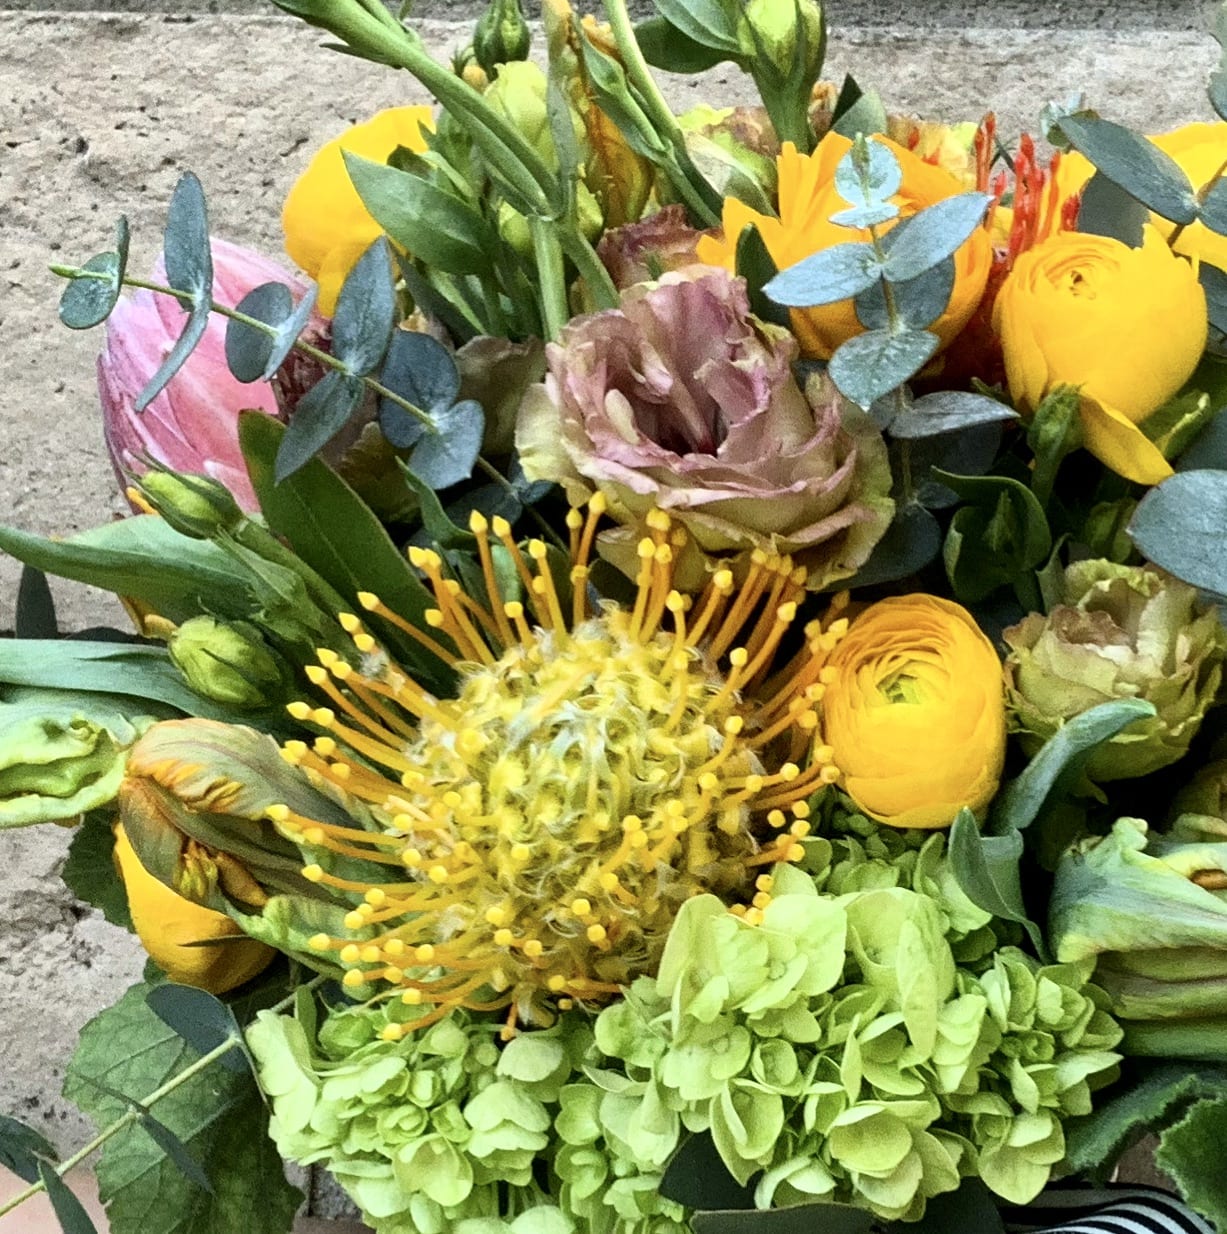 Tones of Citrus  - Let The Plum Dahlia create the perfect custom gift in shoes of vibrant pastels in tones of yellow, green and peach seasonal blooms. Choose your budge and the perfect seasonal flowers will come together just for you and your recipient.